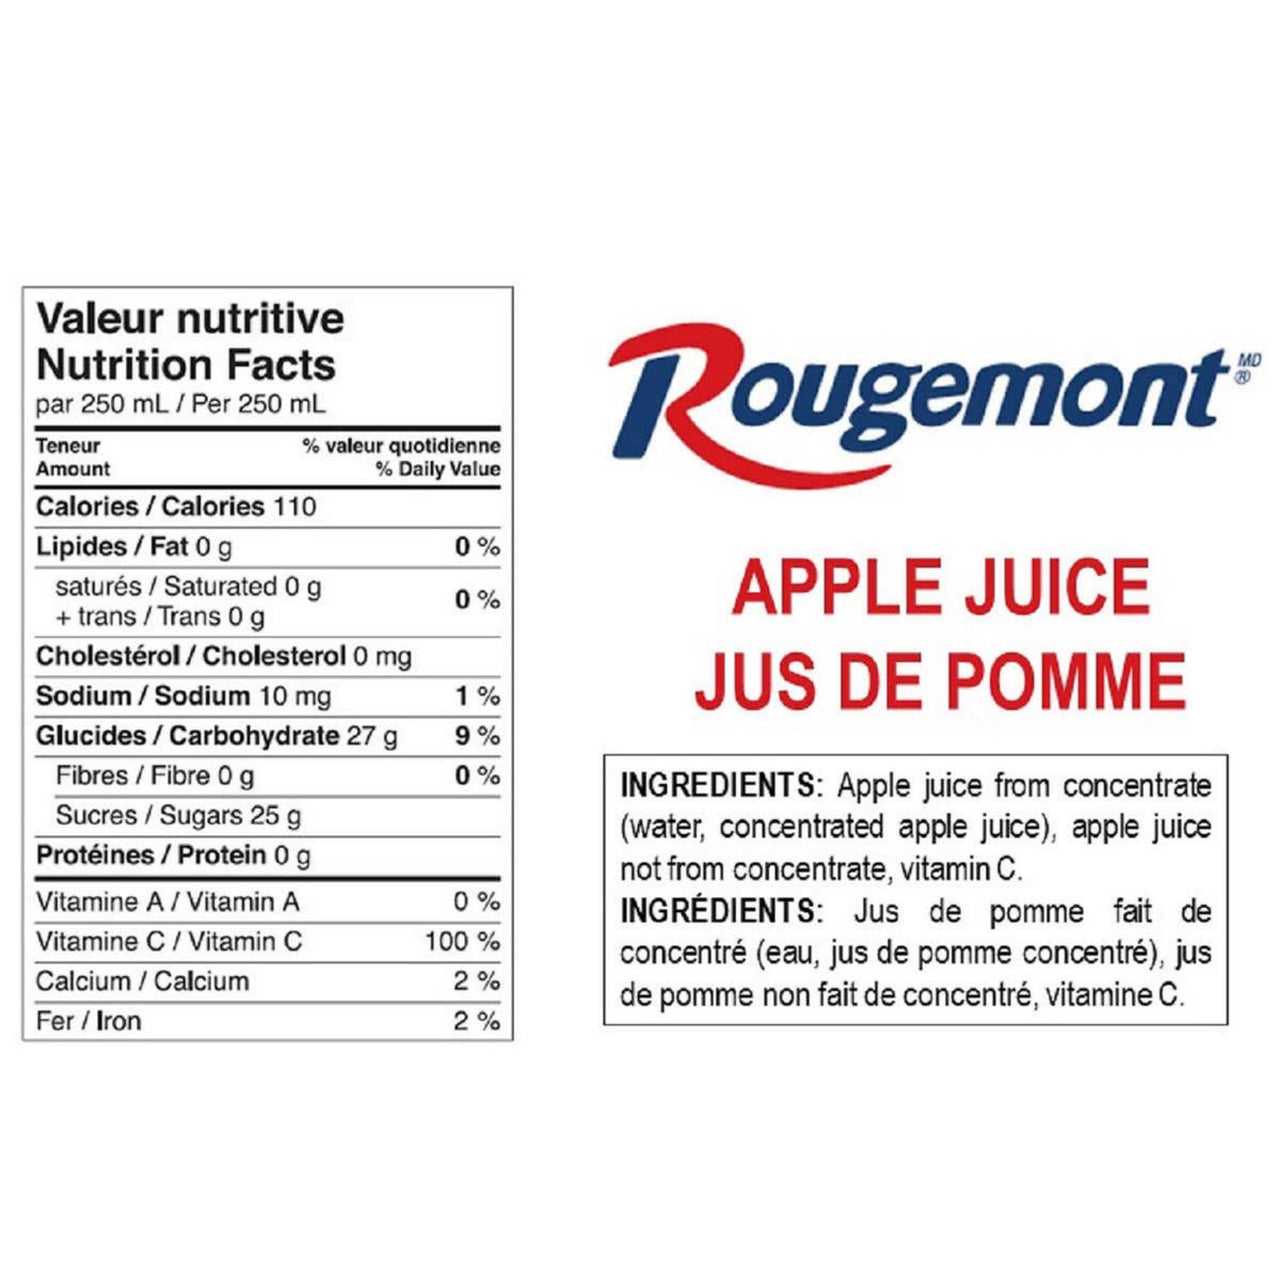 Image of Rougemont Apple Juice 6-pack